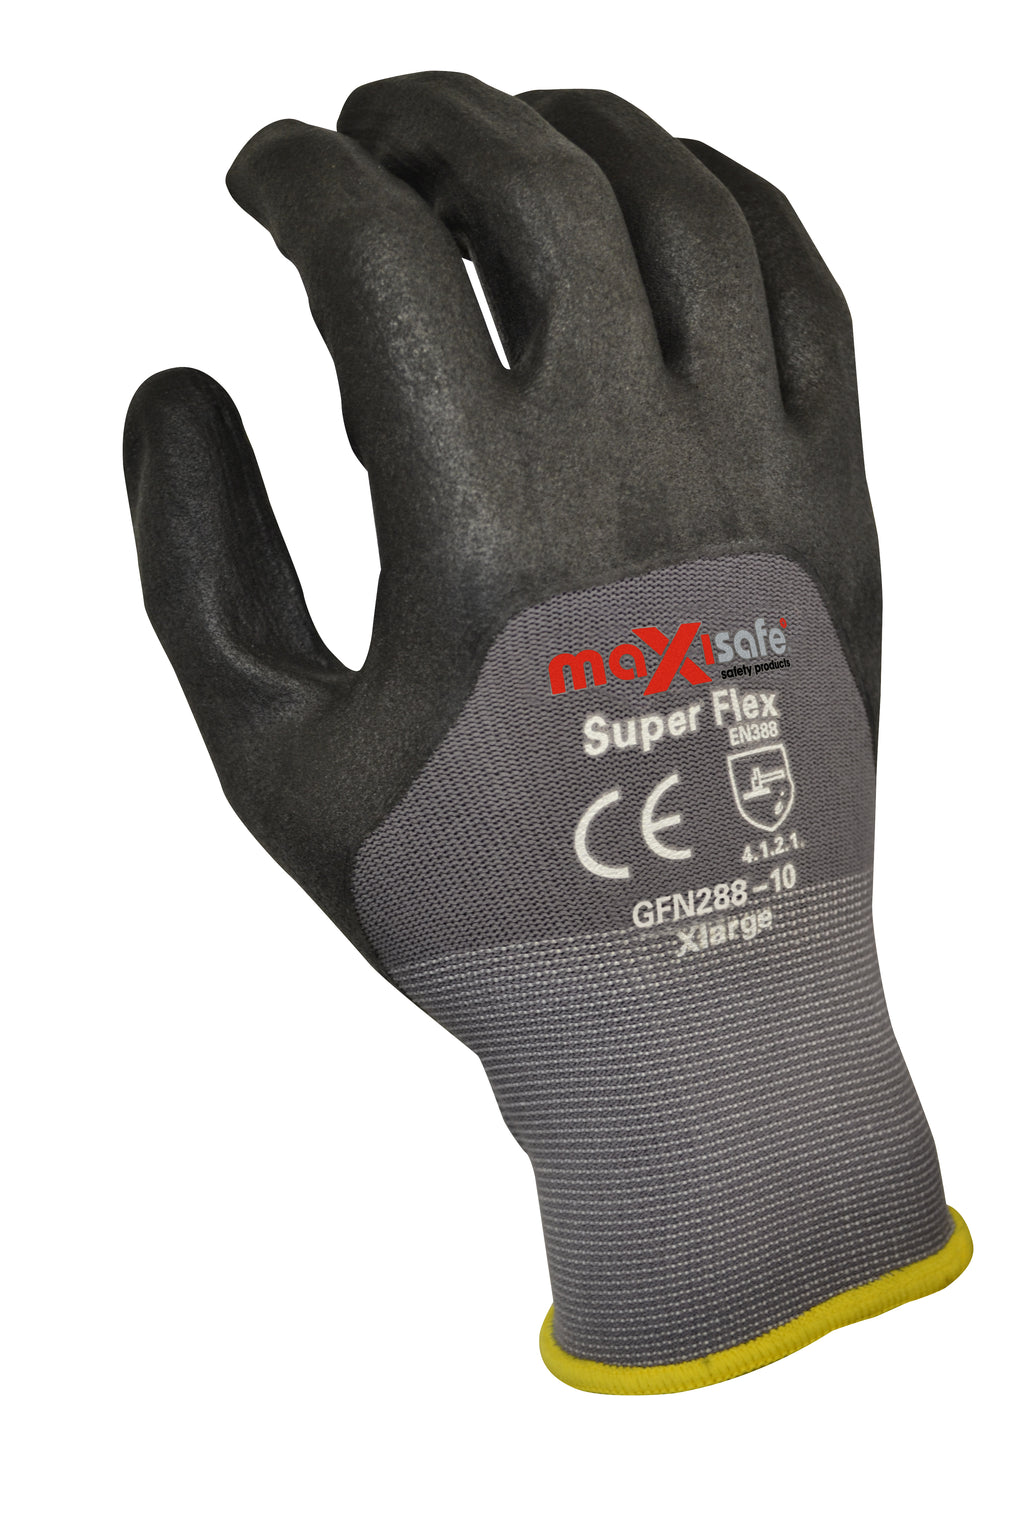 Supaflex 3/4 Coated Synthetic Glove